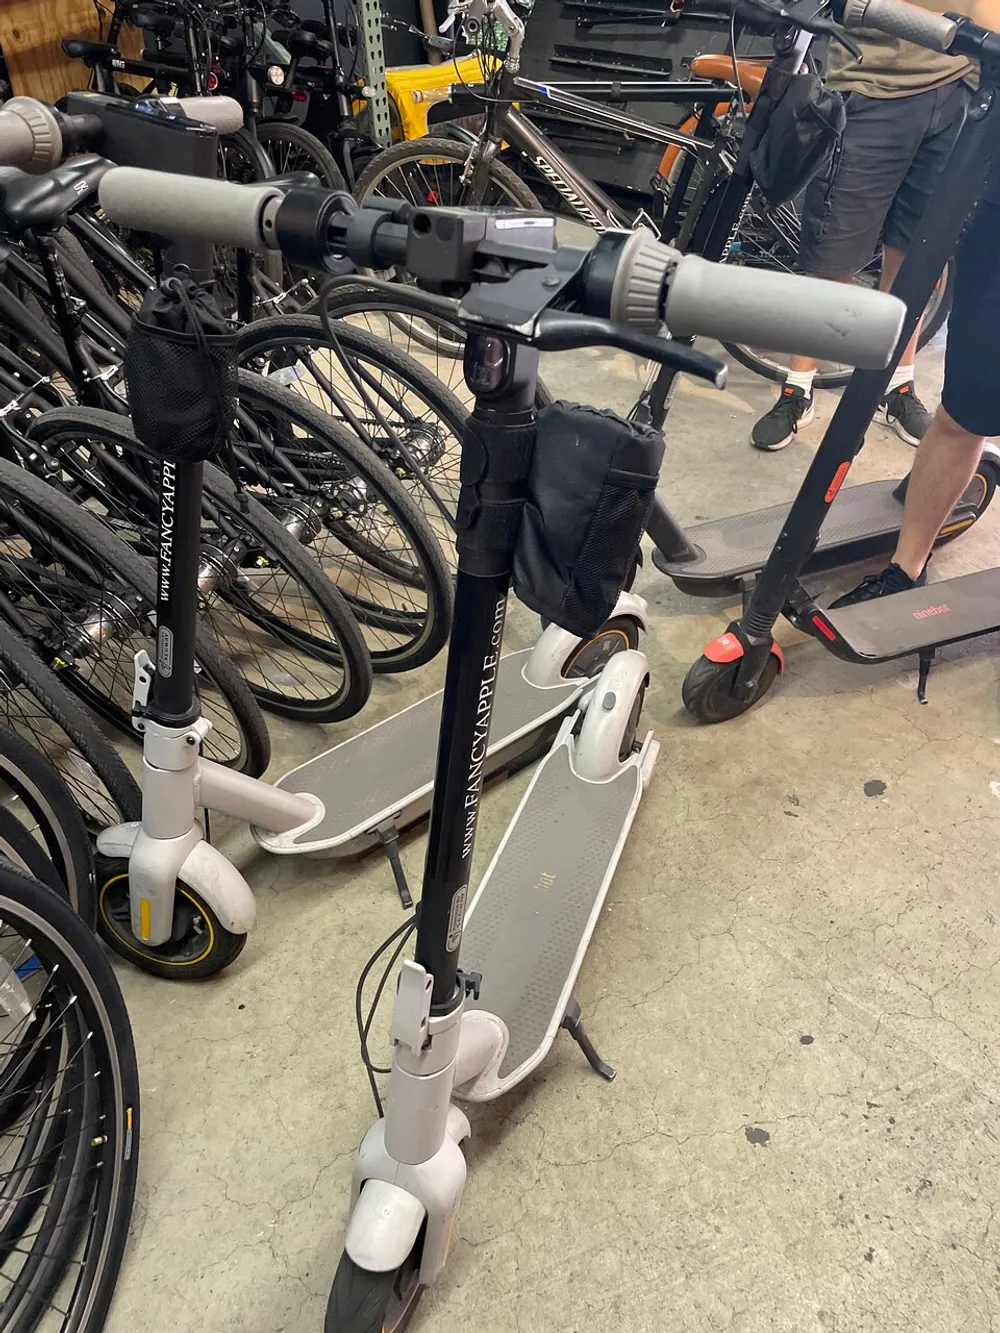 The image shows an urban scene with electric scooters and bicycles closely packed together possibly in a rental shop or parking area